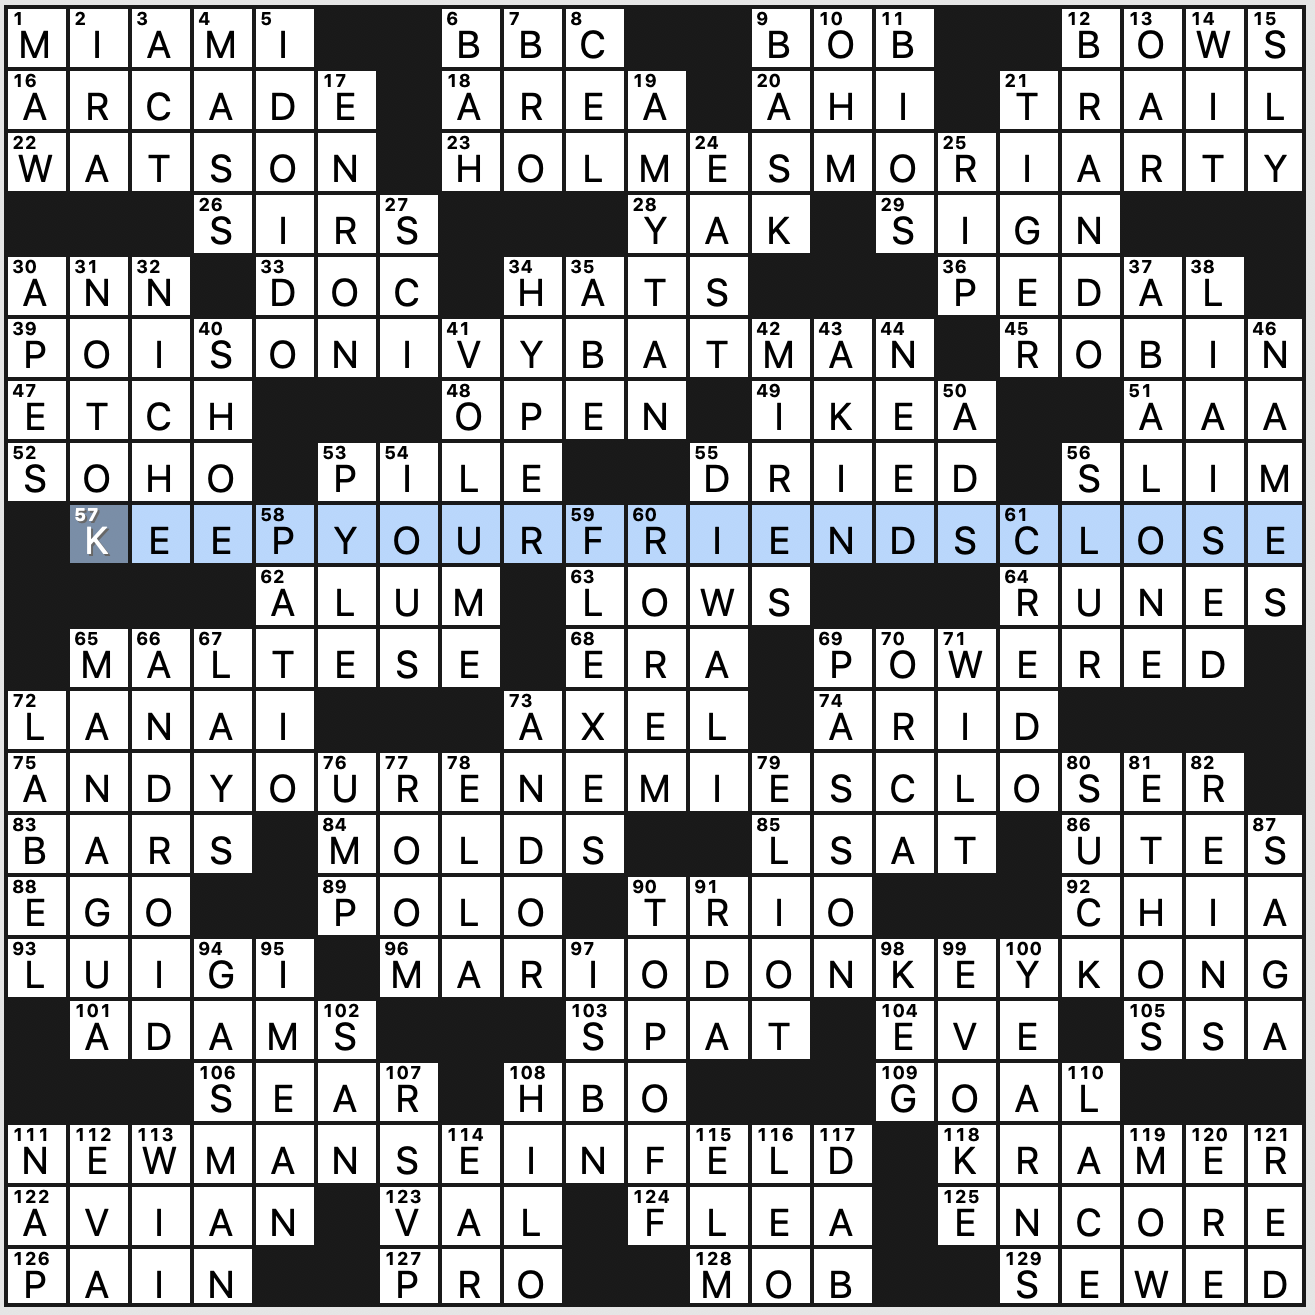 Today's clue from the new york times crossword puzzle is. 